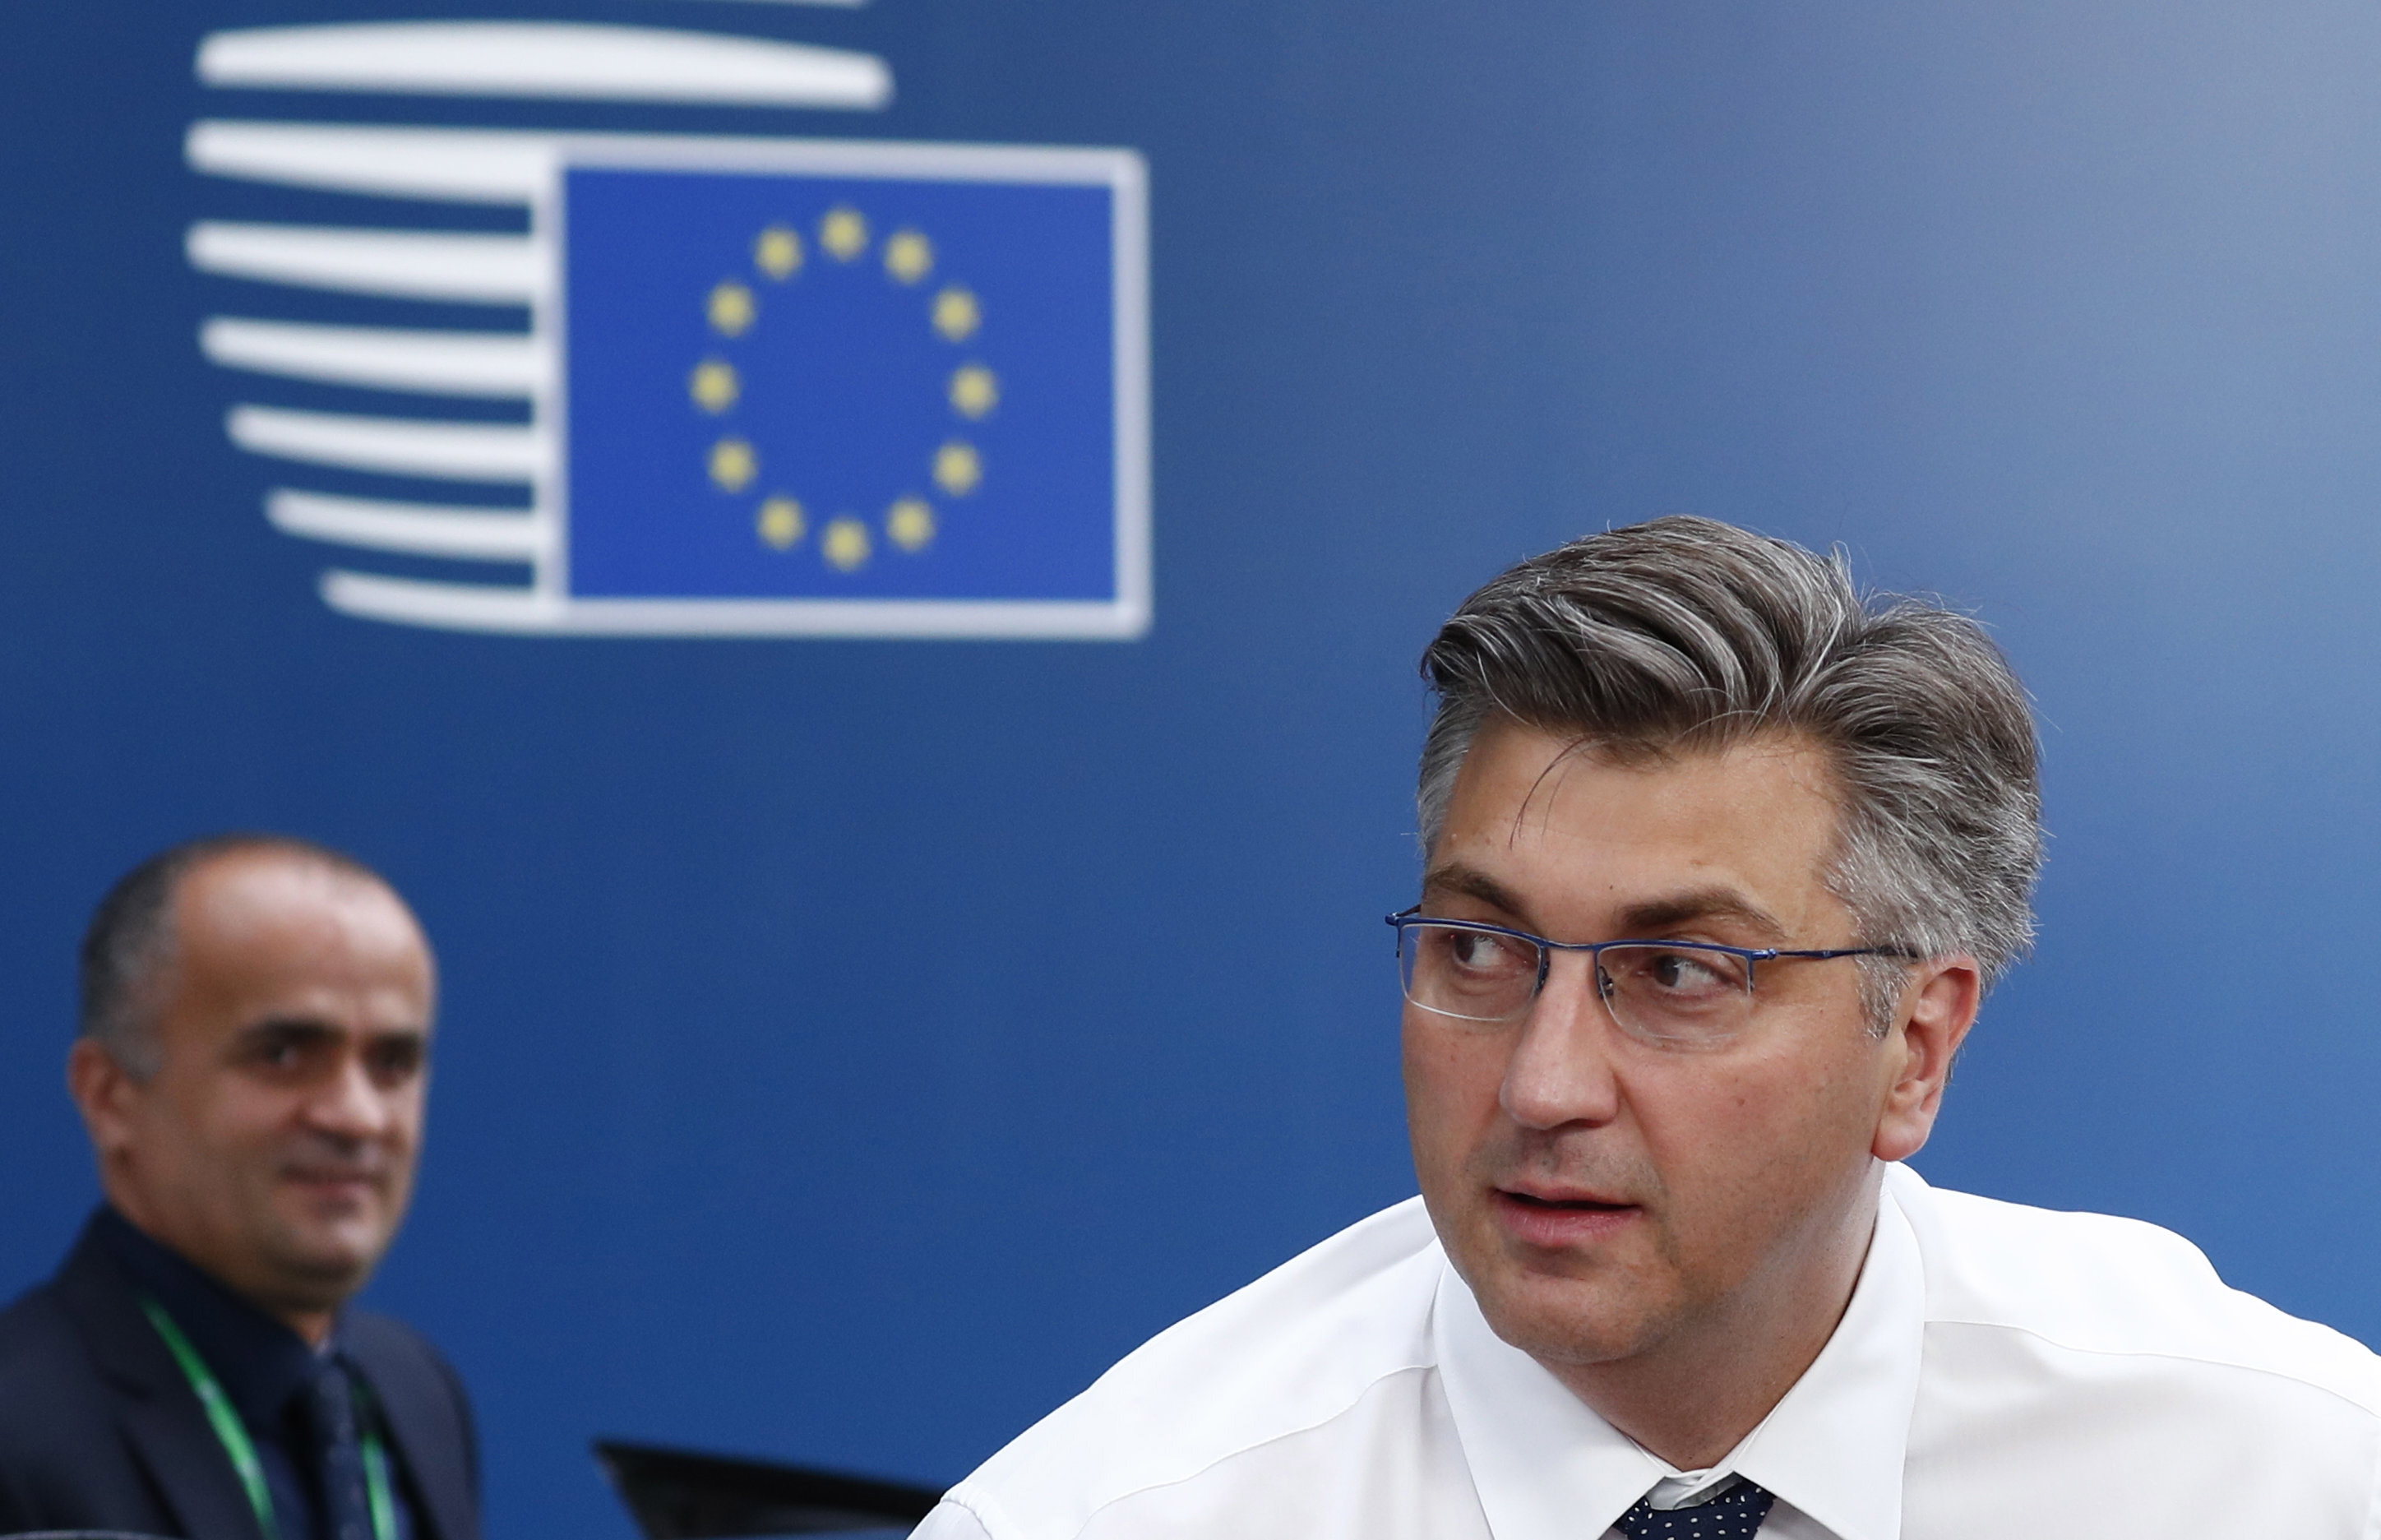 epa07684711 Croatia's Prime Minister Andrej Plenkovic prior a meeting on the sidelines of a Special European Council in Brussels, Belgium, 30 June 2019. Heads of states or governments from EU member states meet to continue discussions on the possible candidates for the heads of EU institutions, namely European Council President, President of the European Commission, High Representative of the Union for Foreign Affairs and Security Policy (Foreign Policy Chief), and President of the European Central Bank.  EPA/FRANCOIS LENOIR / POOL